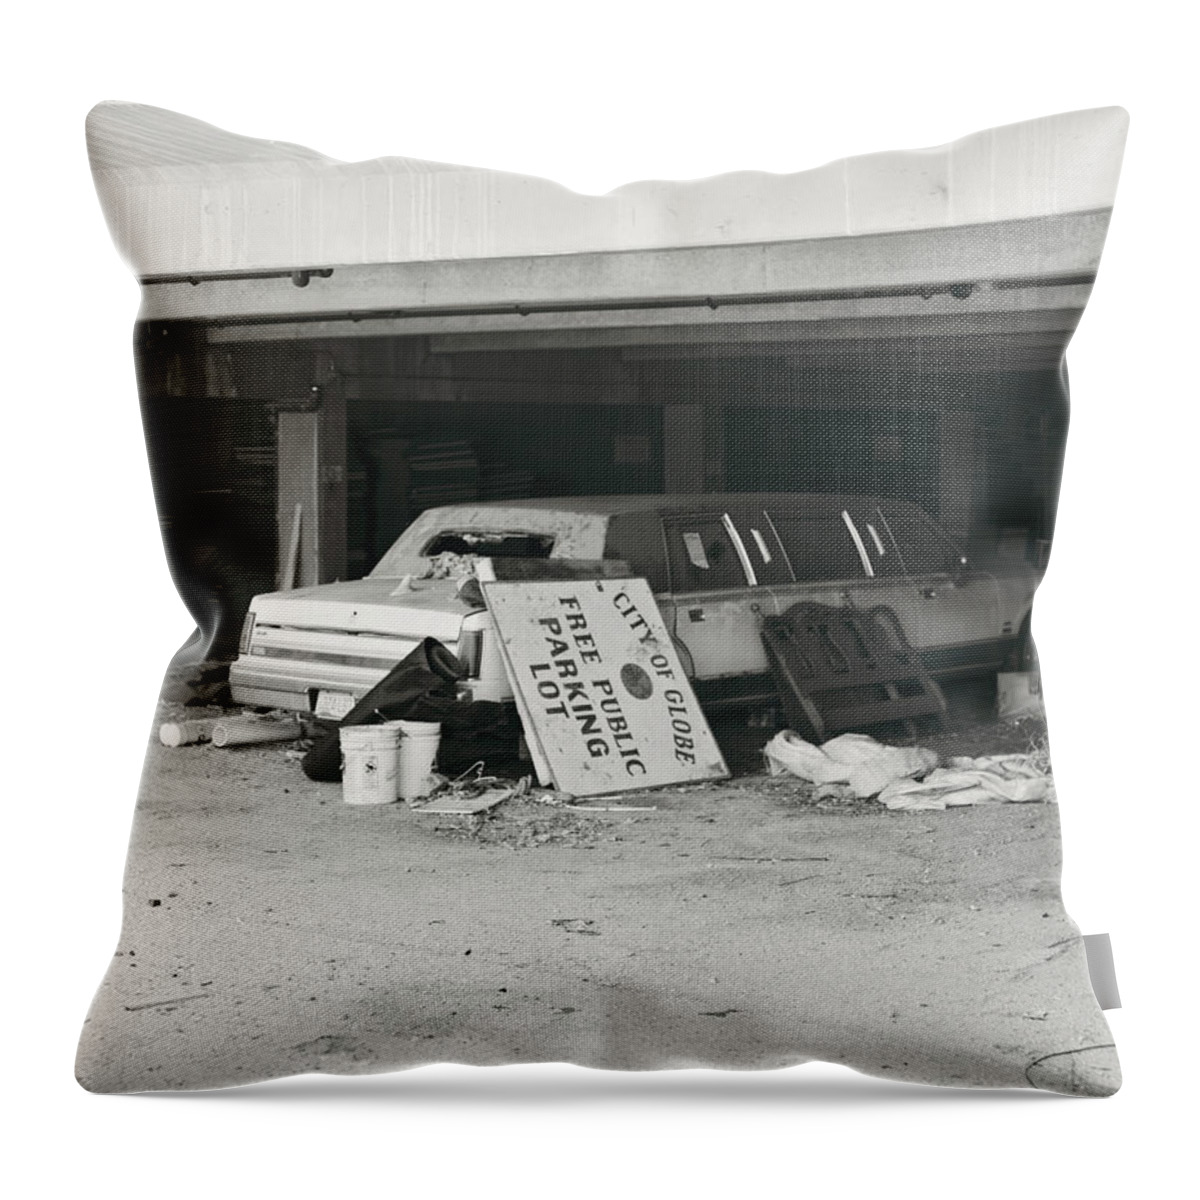 Photograph Throw Pillow featuring the photograph Recession by Richard Gehlbach